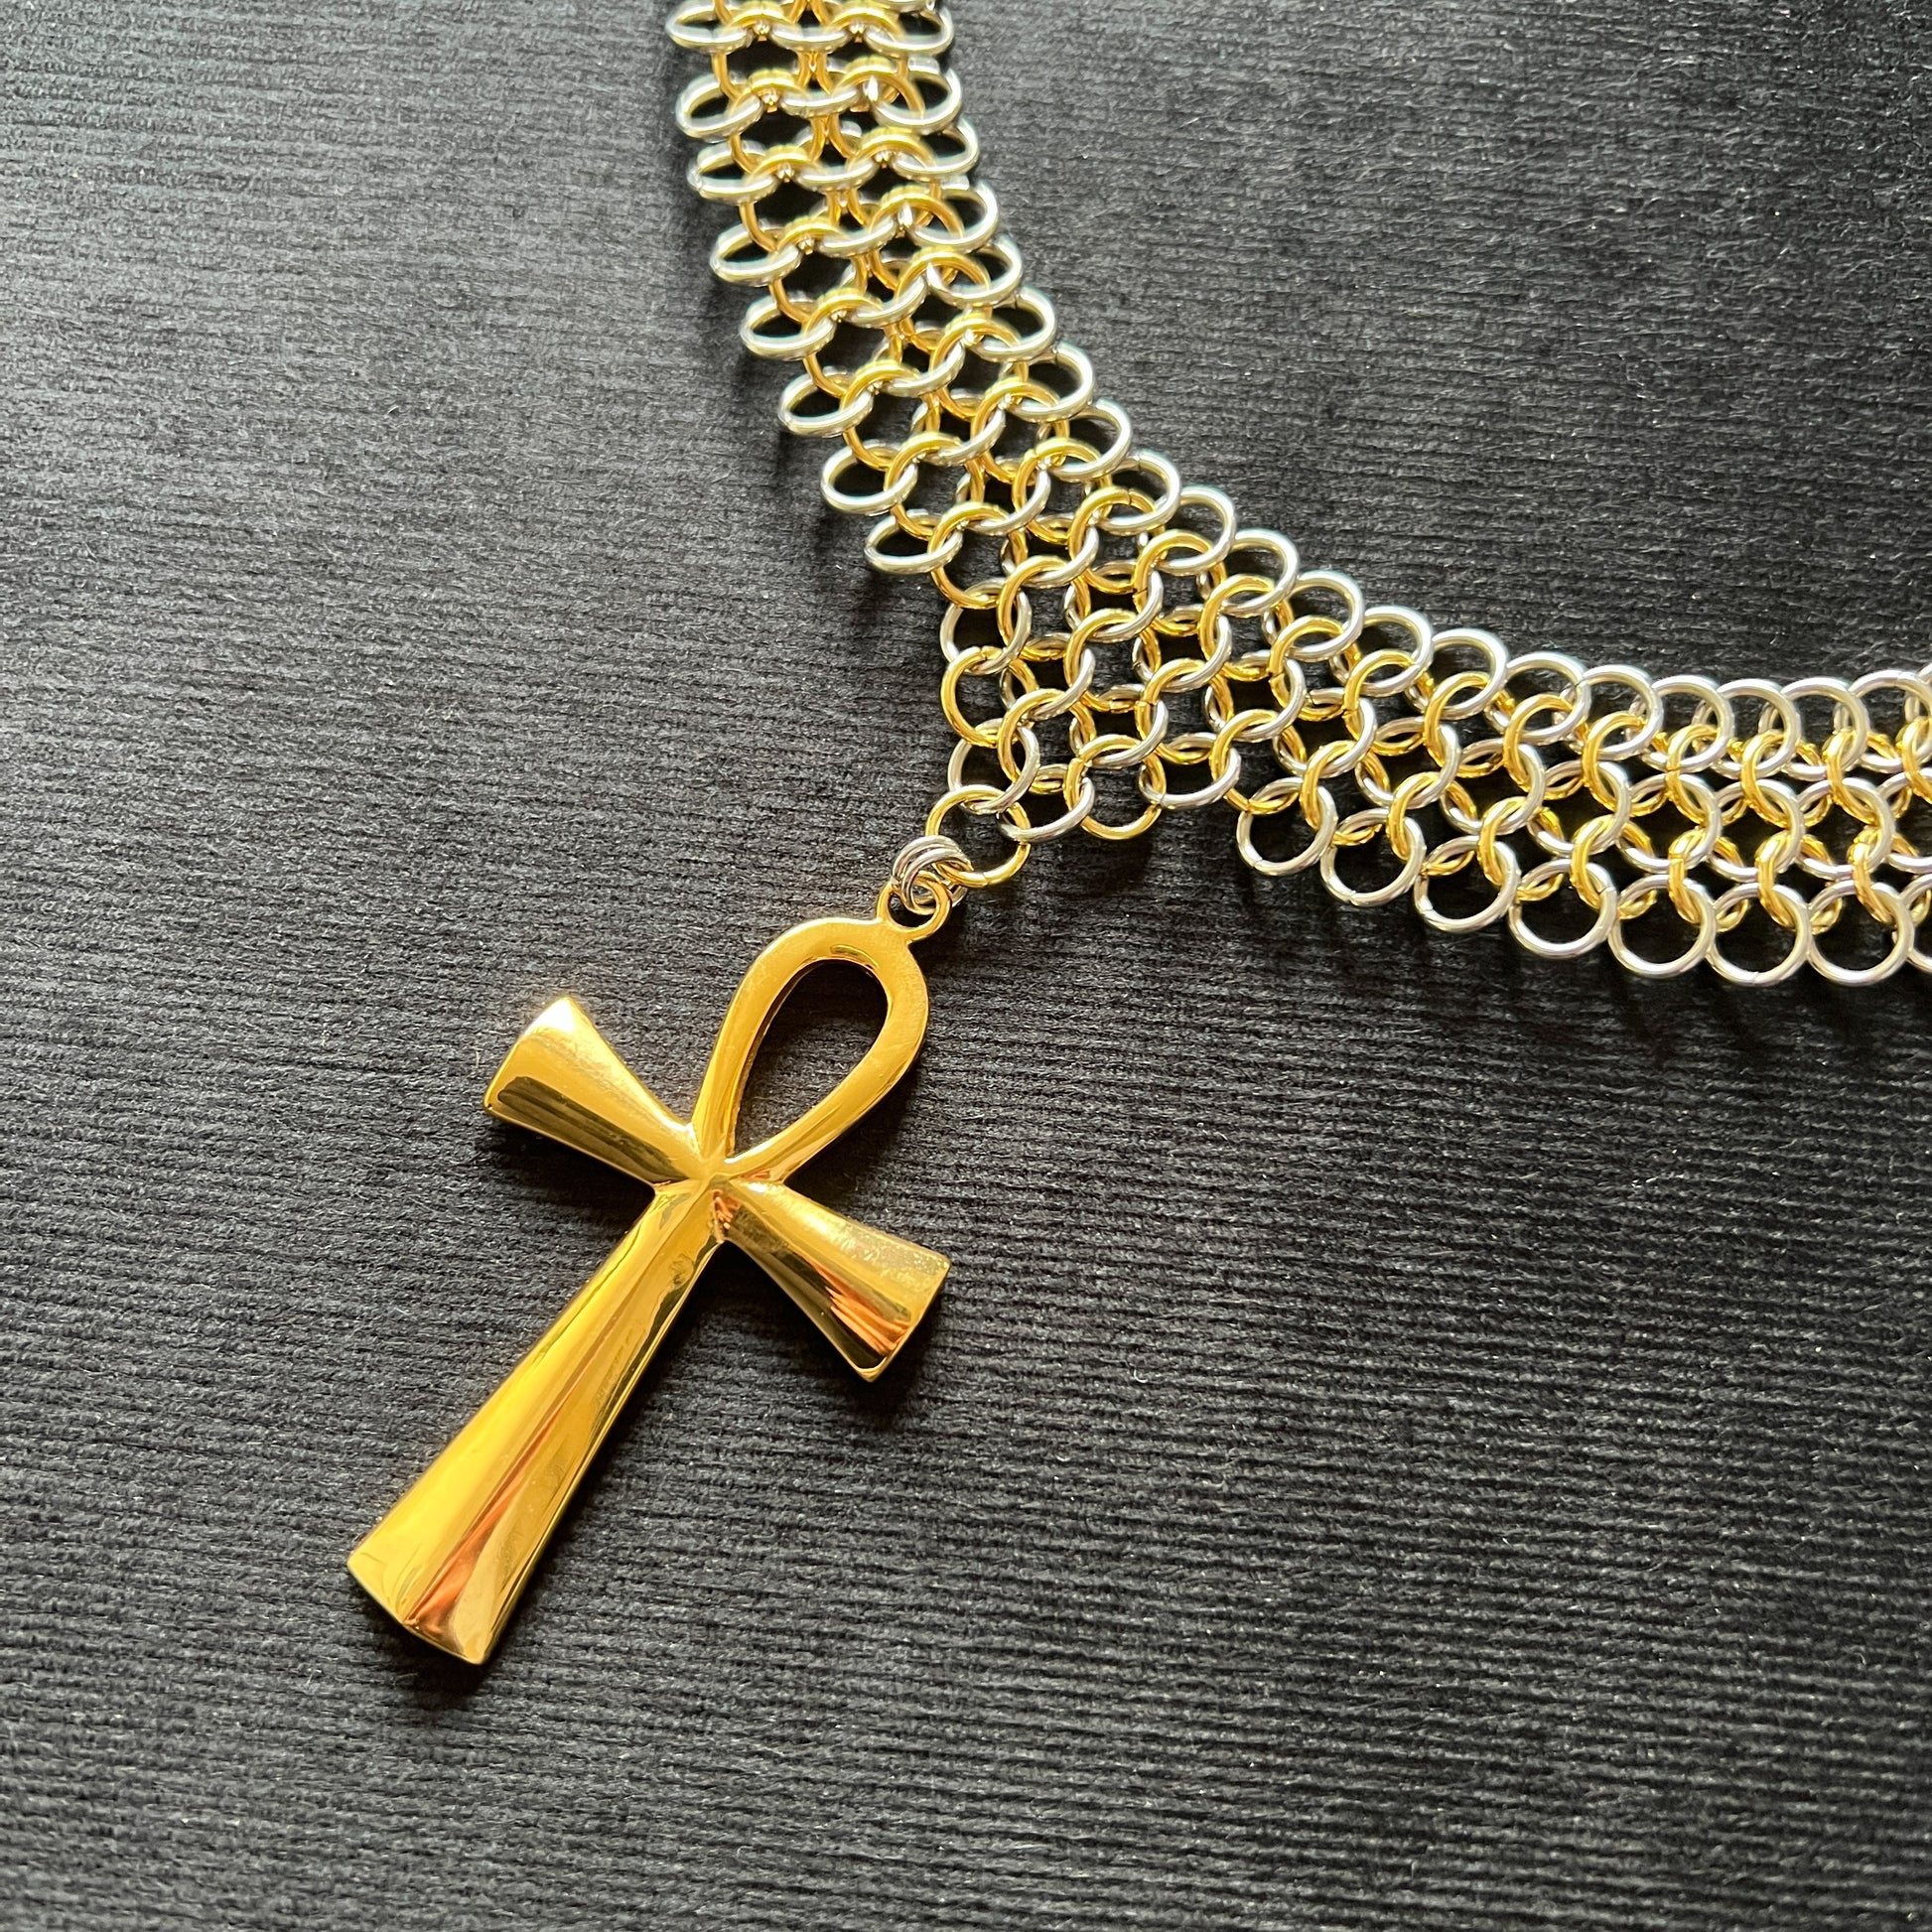 ankh chainmail choker stainless steel 18k gold necklace gothic egyptian occult